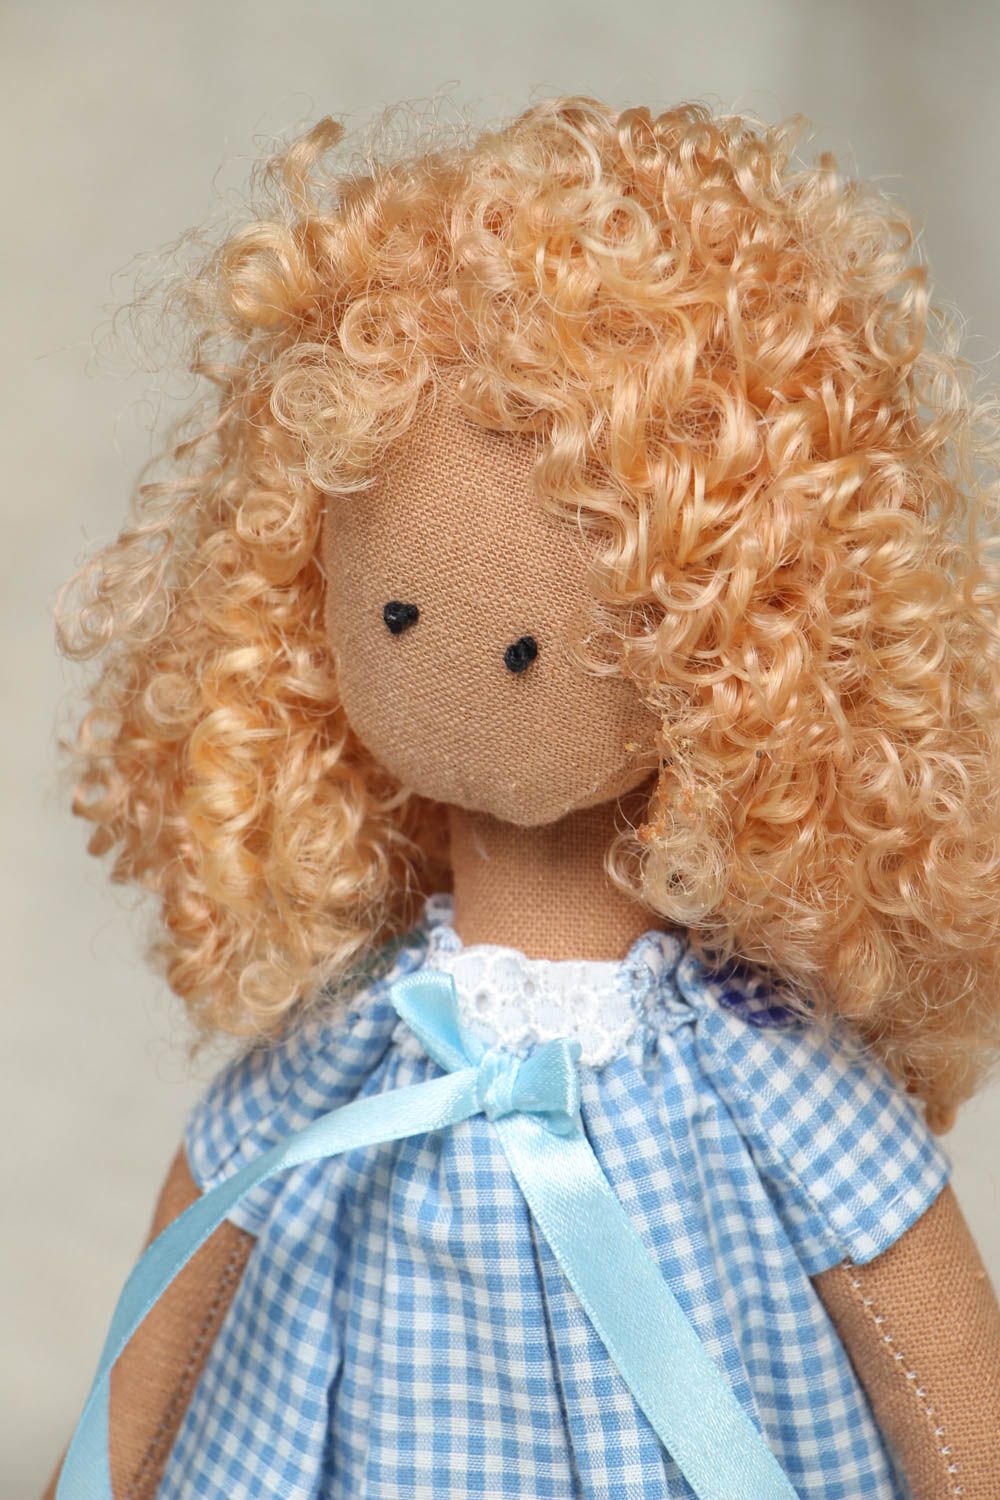 Collectible doll in blue dress photo 2